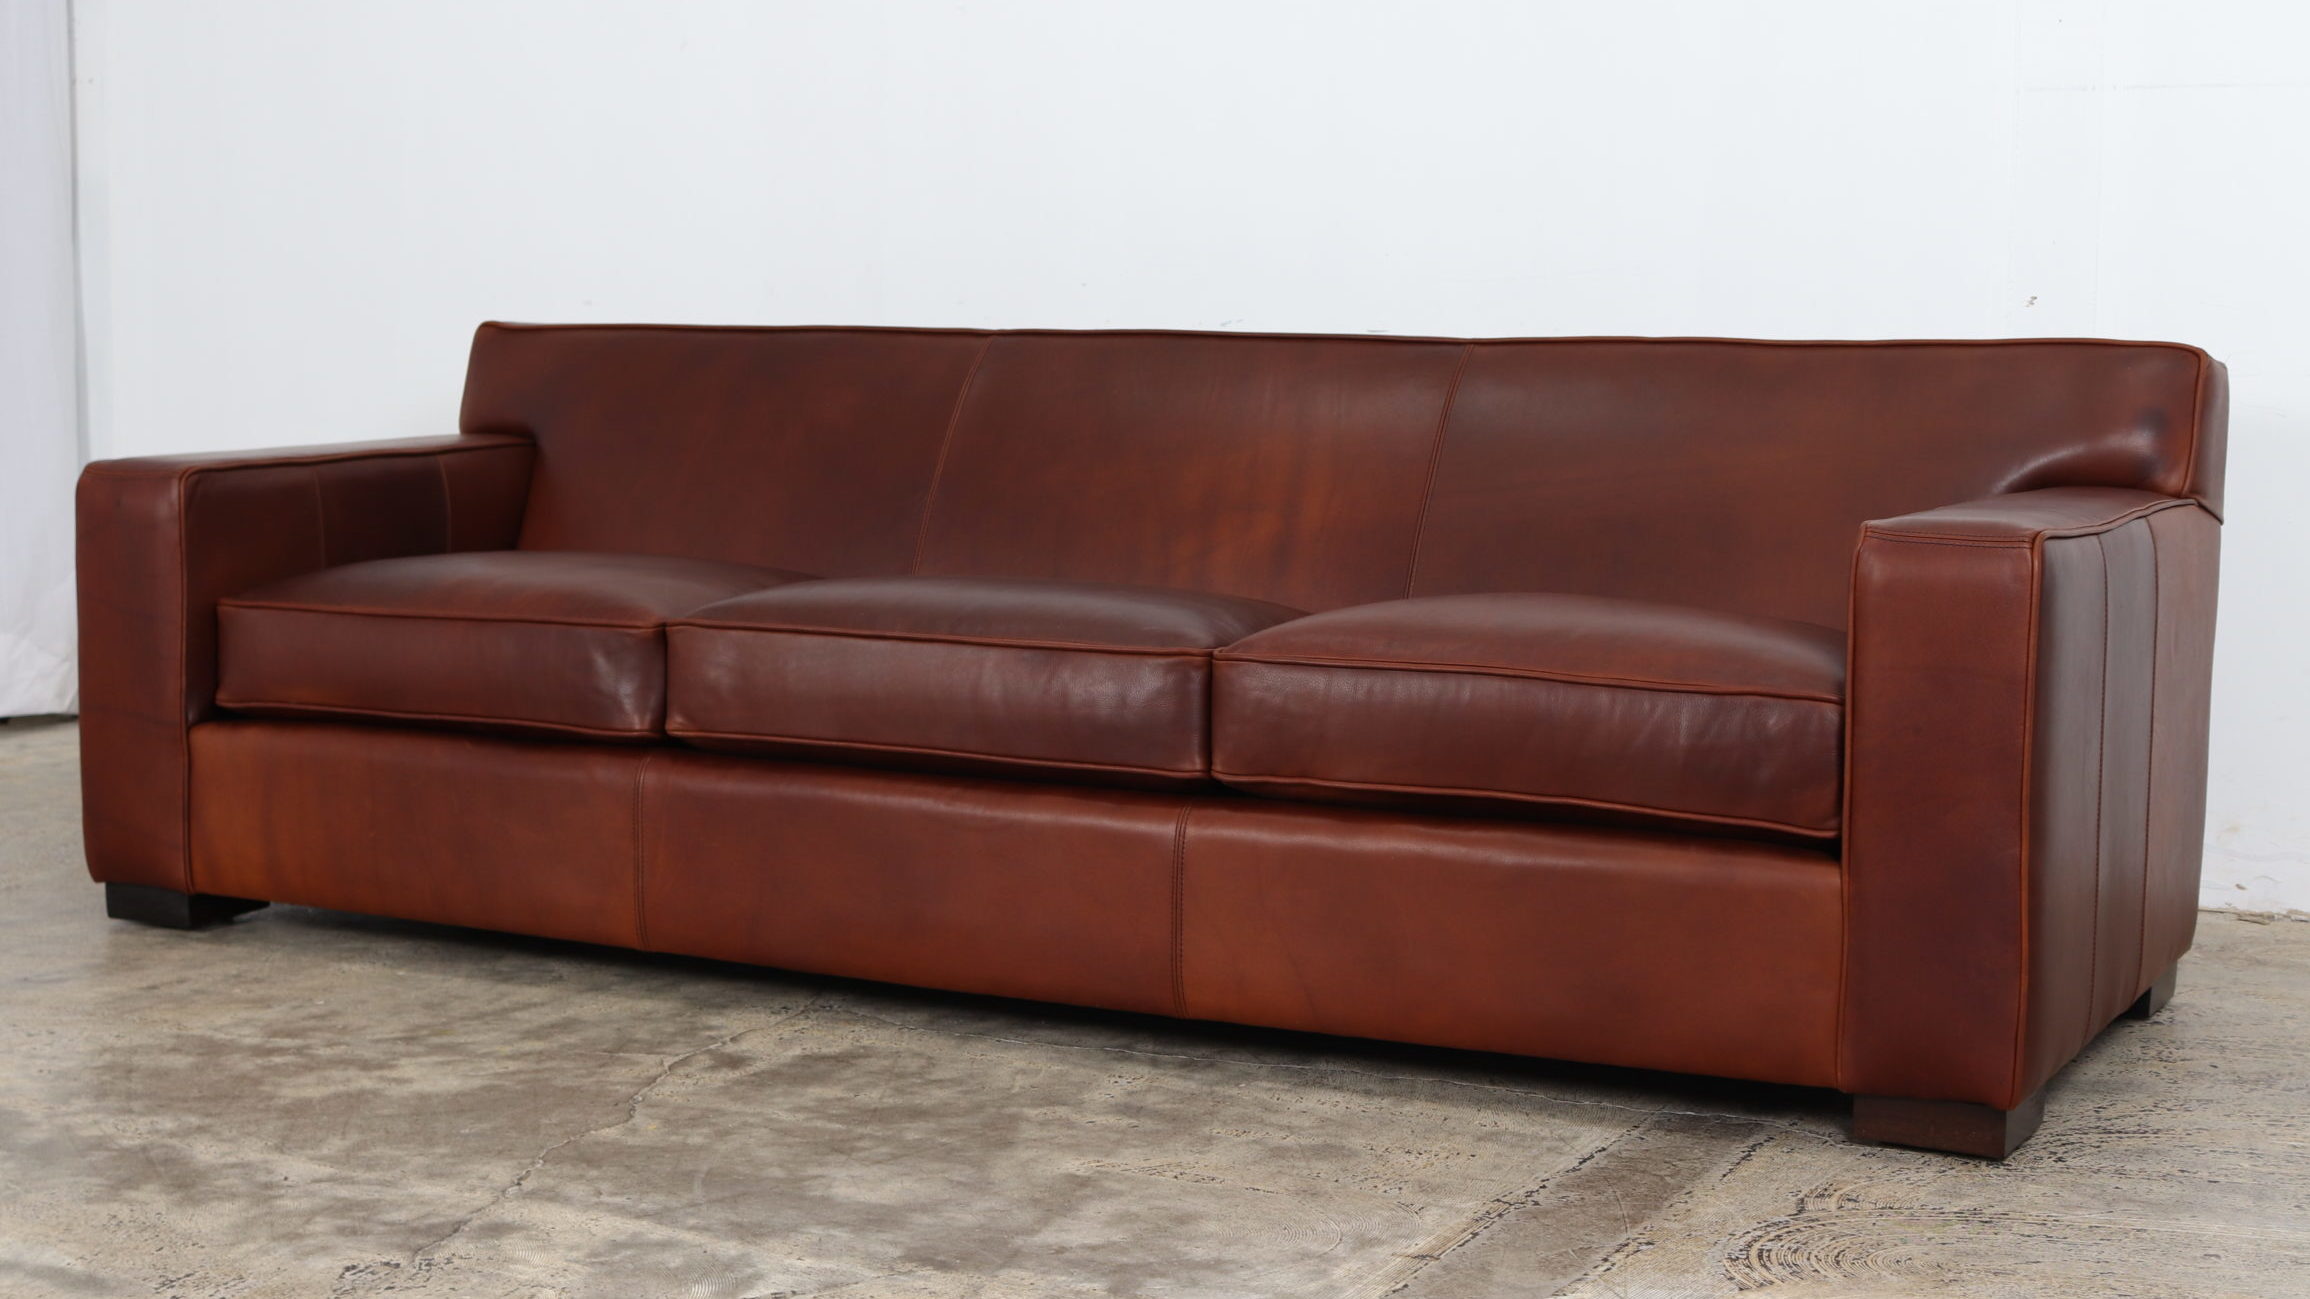 Boone Leather Sofa, Moore & Giles, COCOCO Home, Brown Leather Sofa